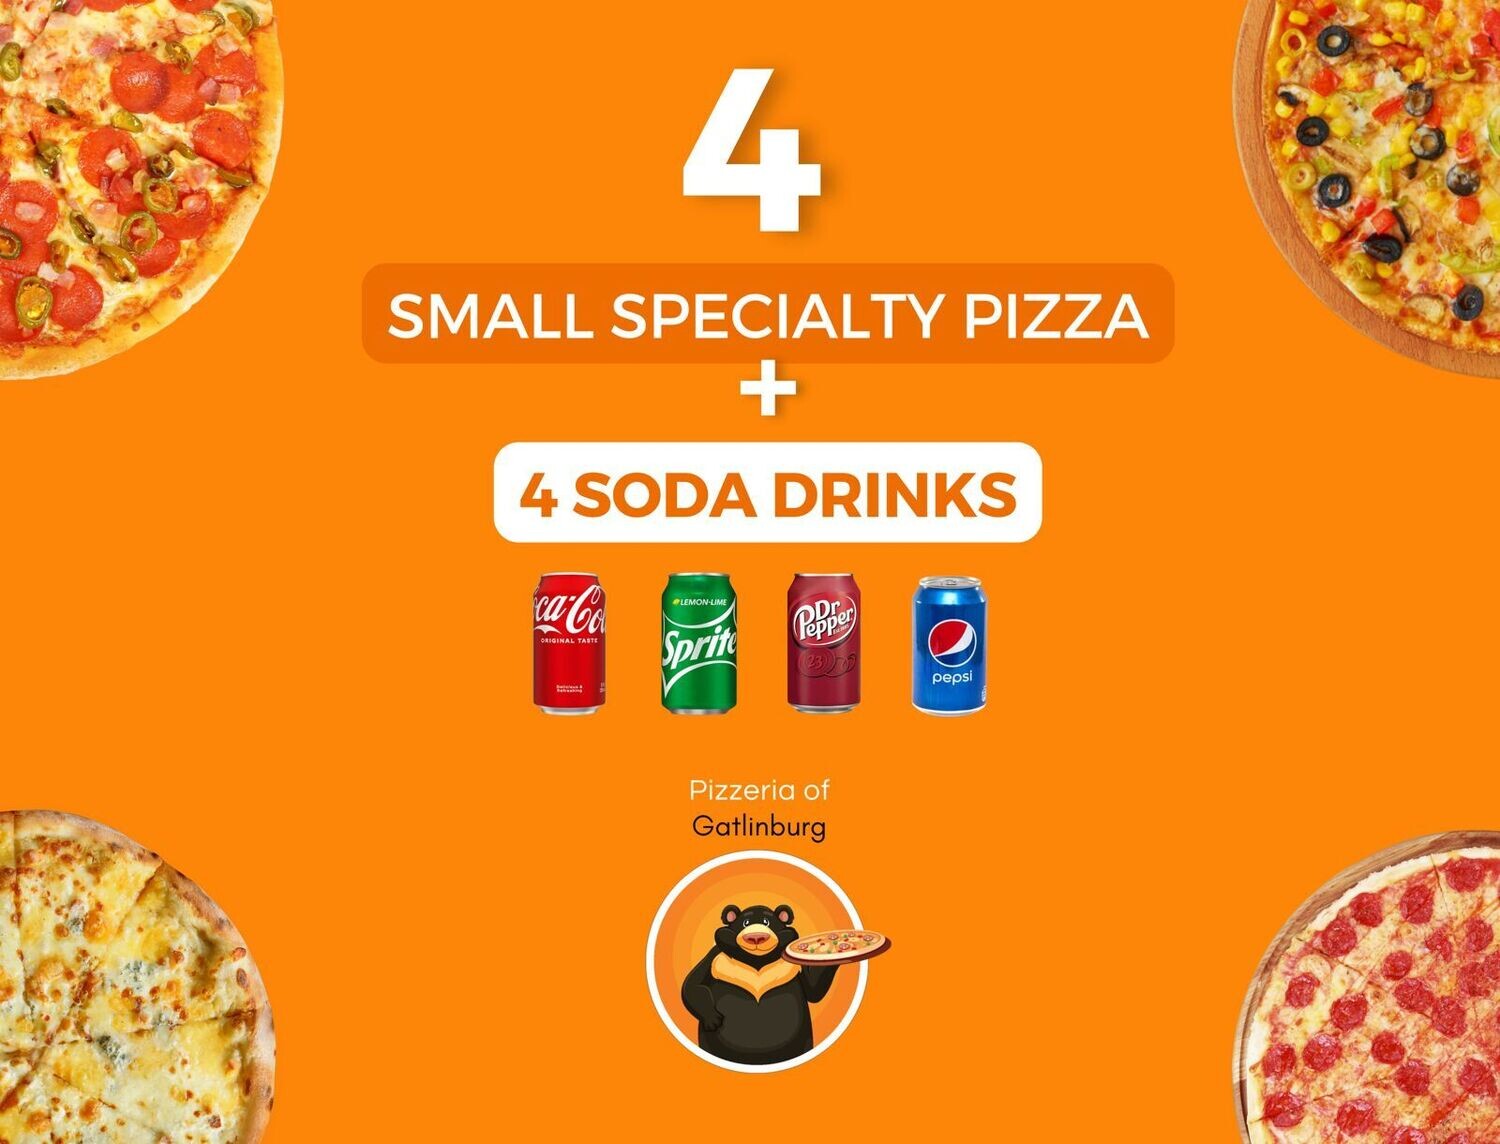 4 Small Specialty Pizzas & 4 Soda Drinks for Free